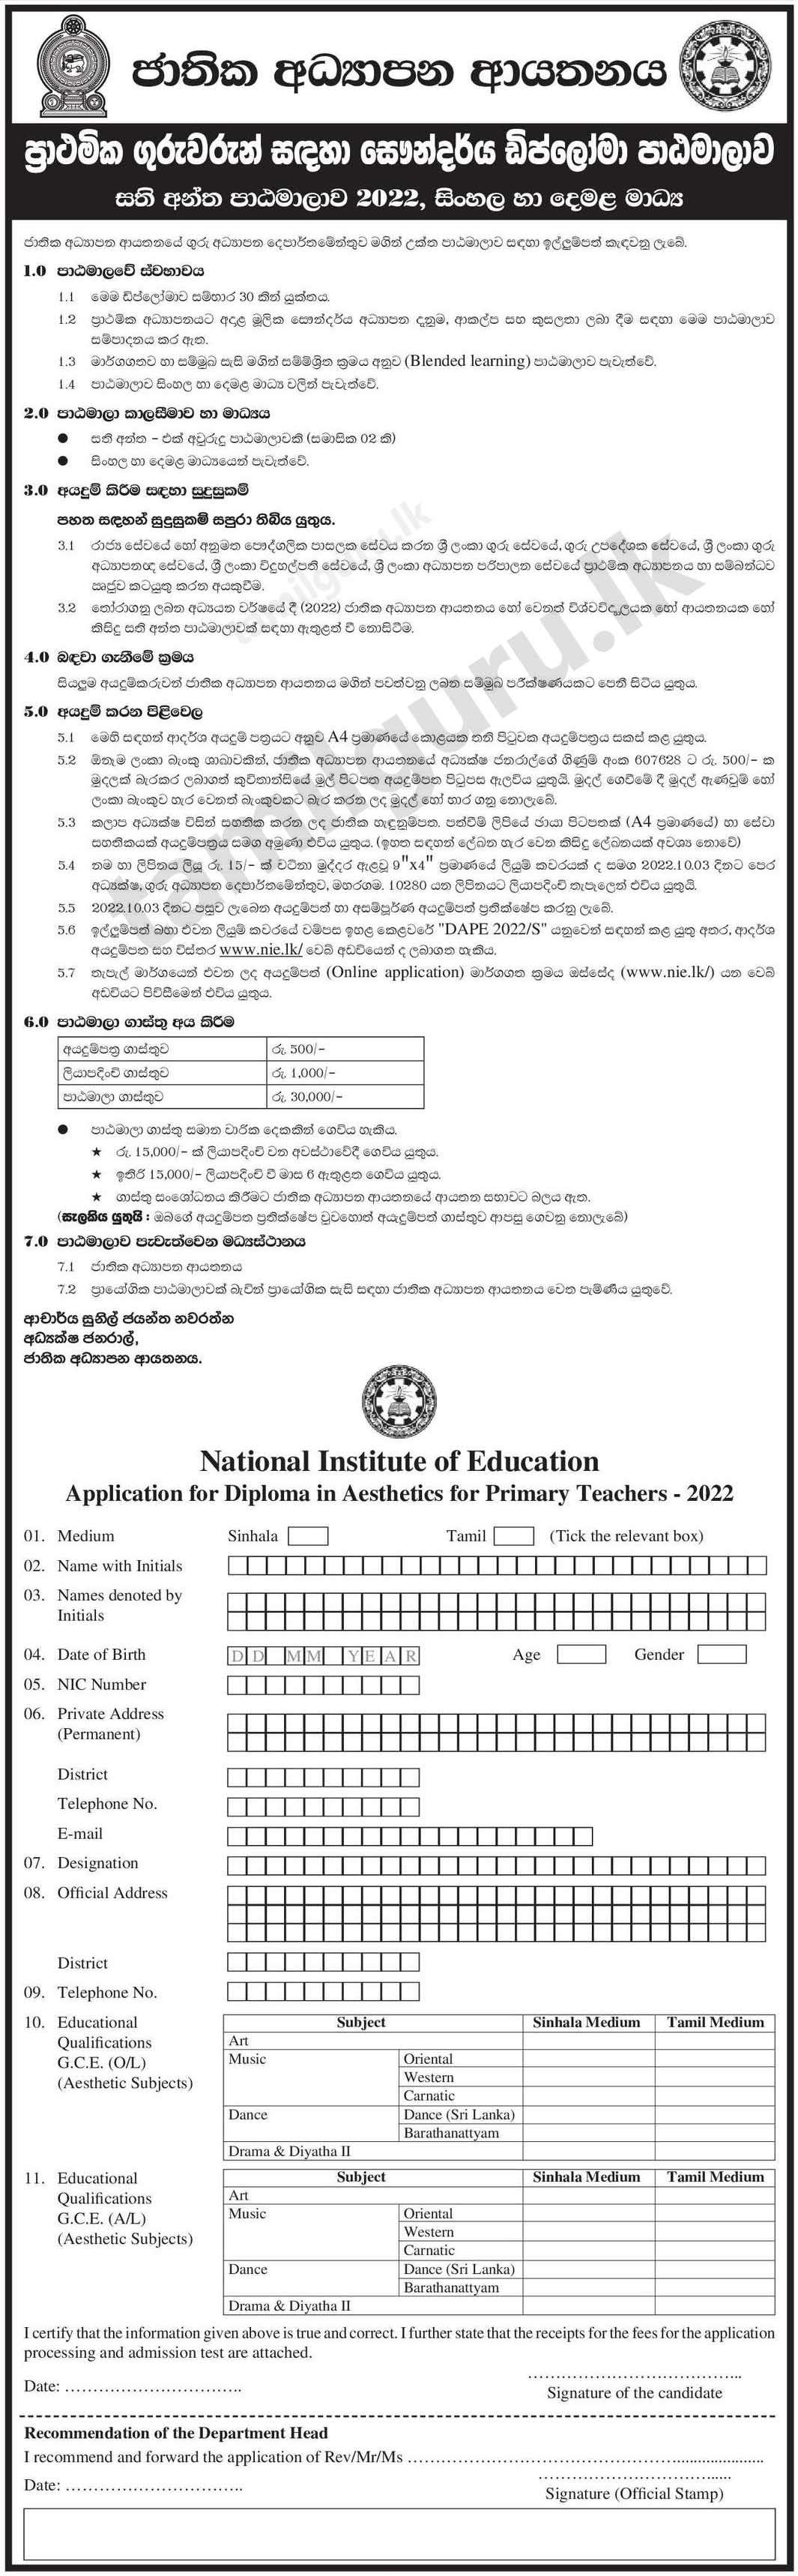 Diploma in Aesthetics for Primary Teachers (2022) (Course) - National Institute of Education (NIE) - Details in Sinhala